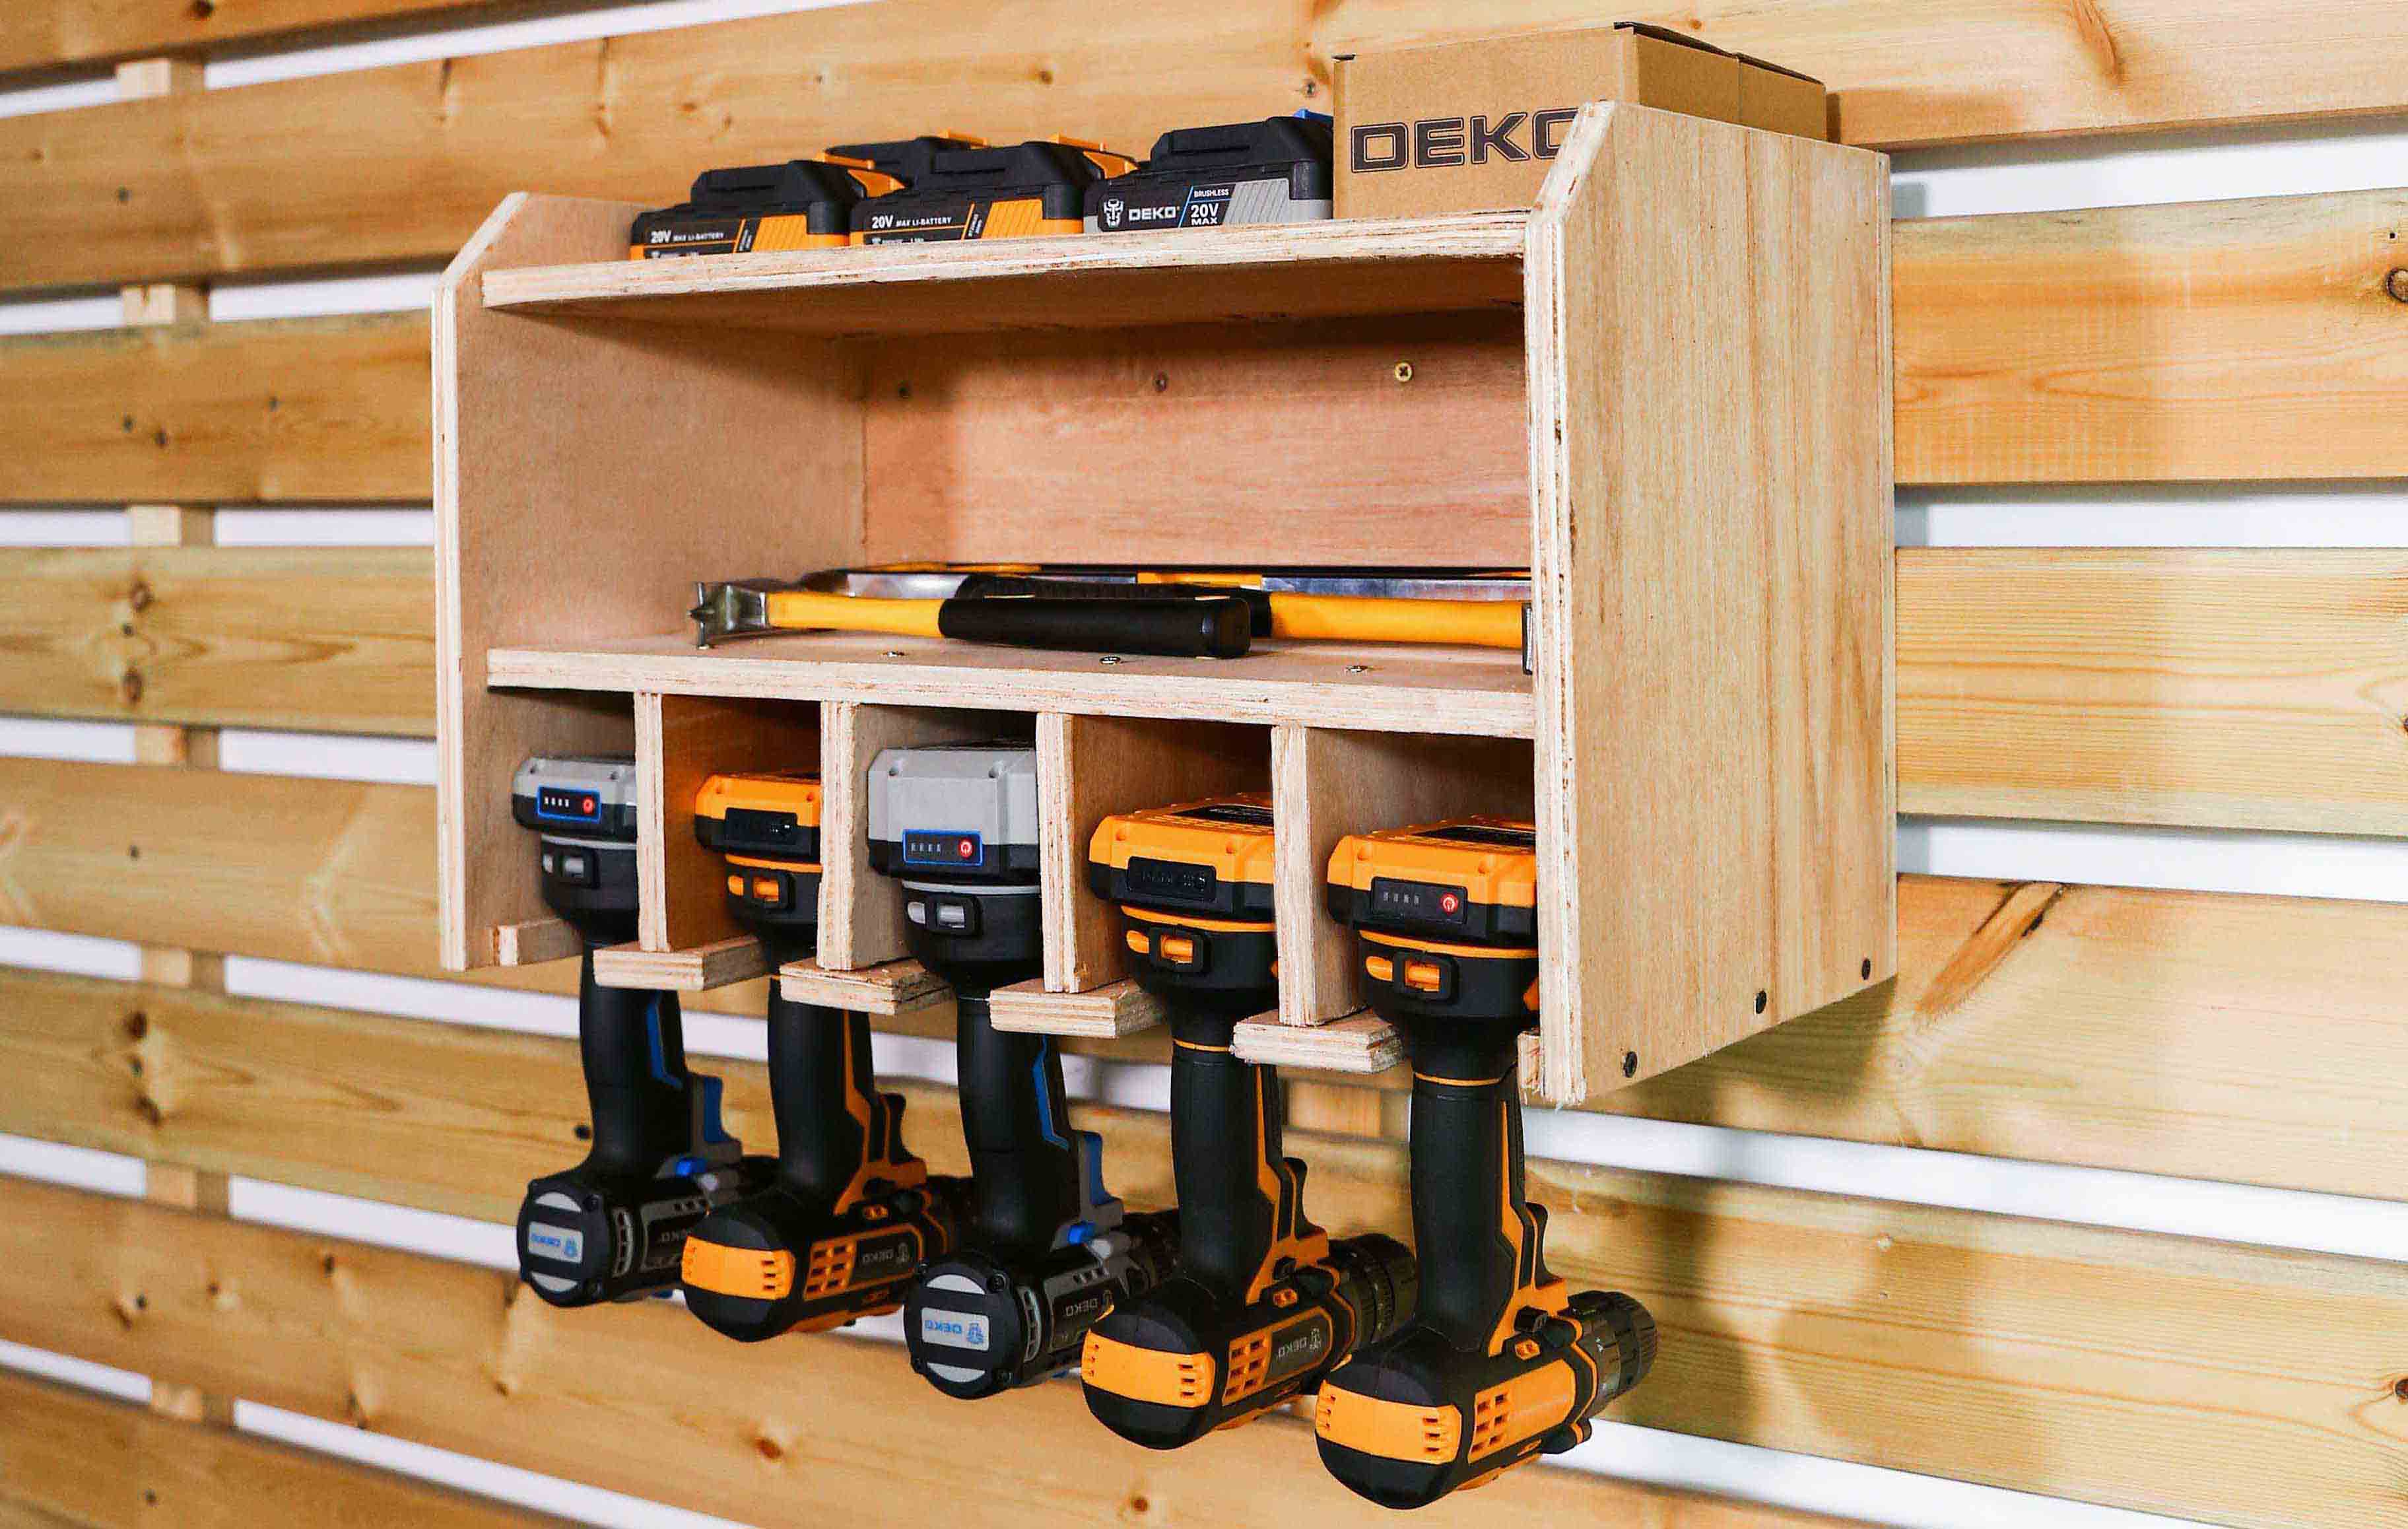 How to make an easy drill charging station – DEKO Tools